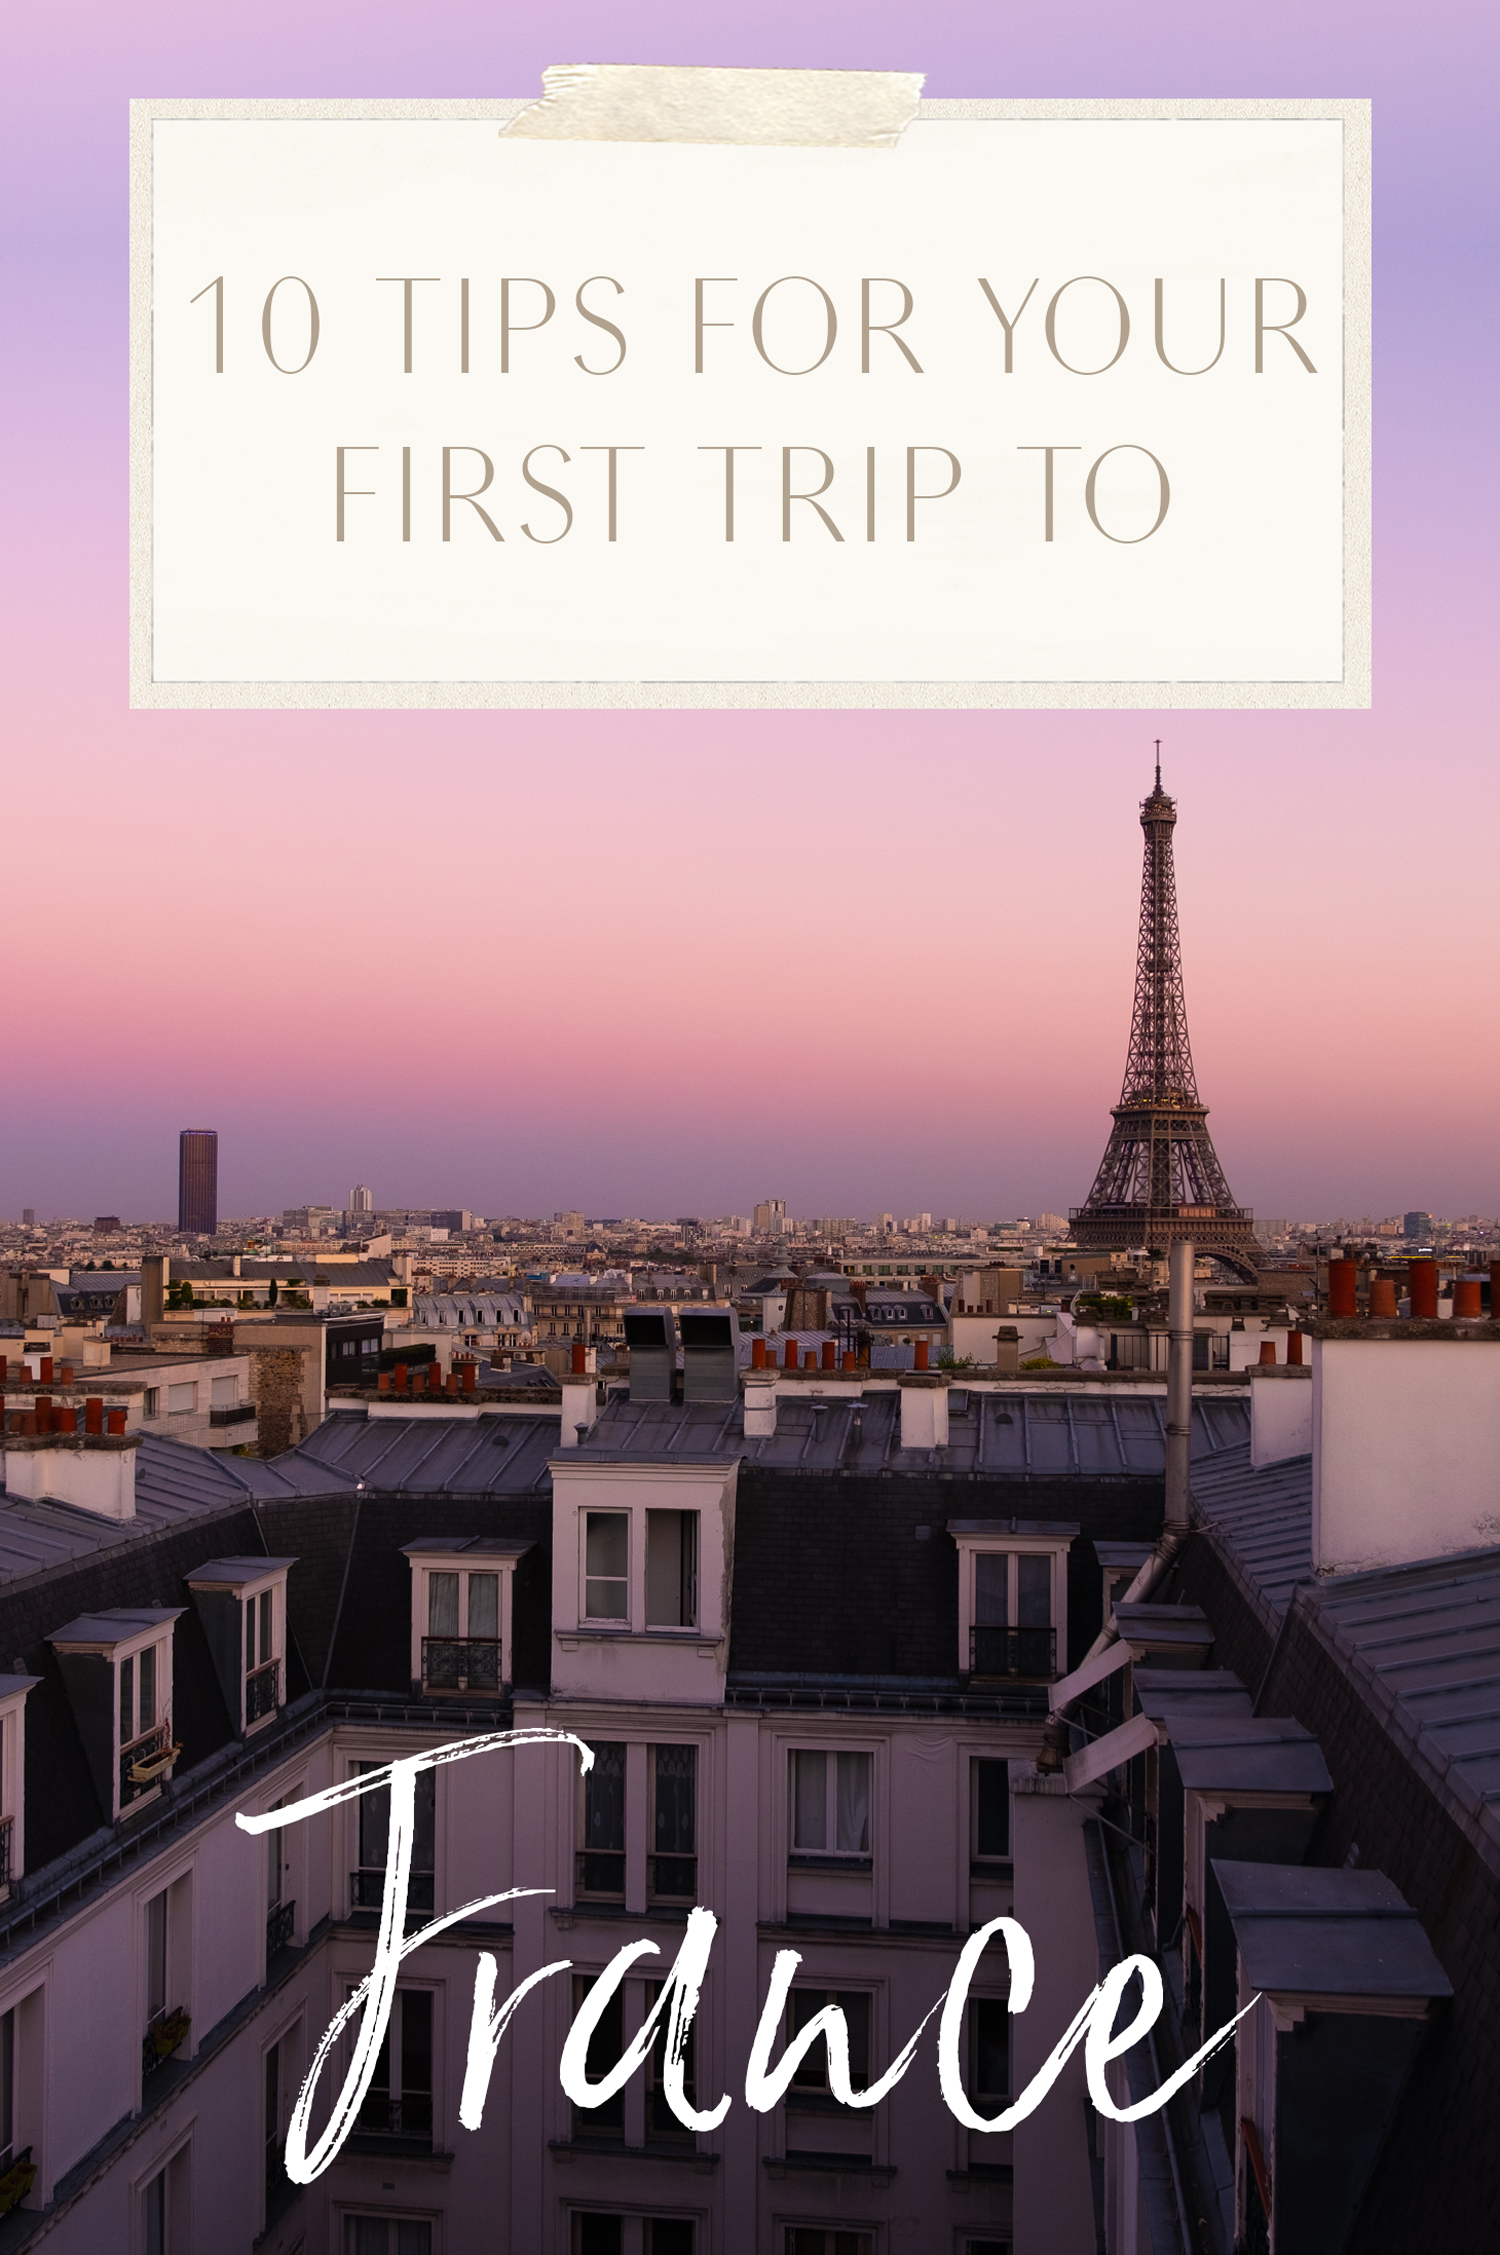 10 tips for your first trip to france